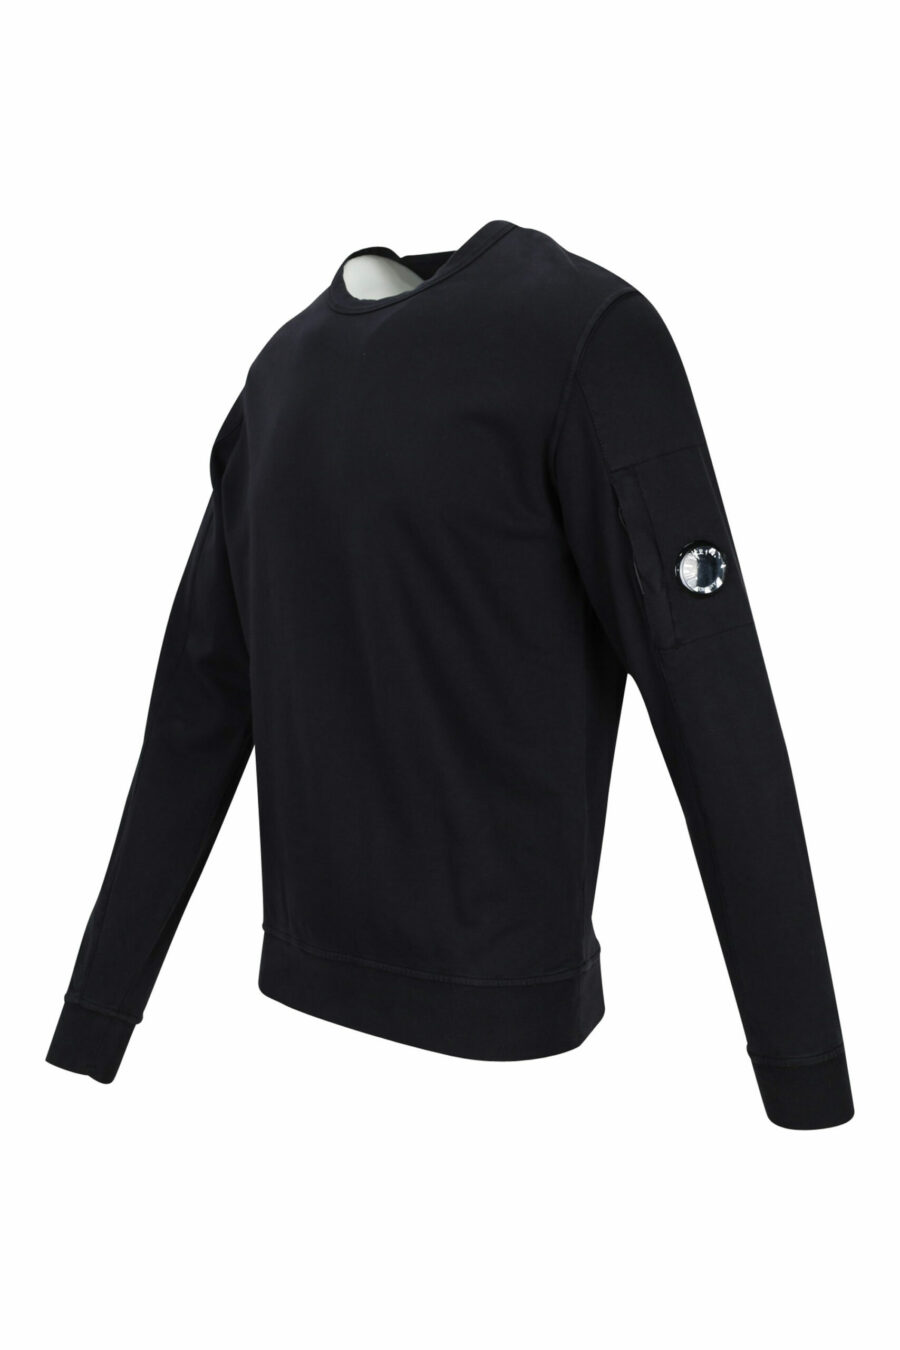 Black sweatshirt with side lens minilogue - 7620943592191 1 scaled